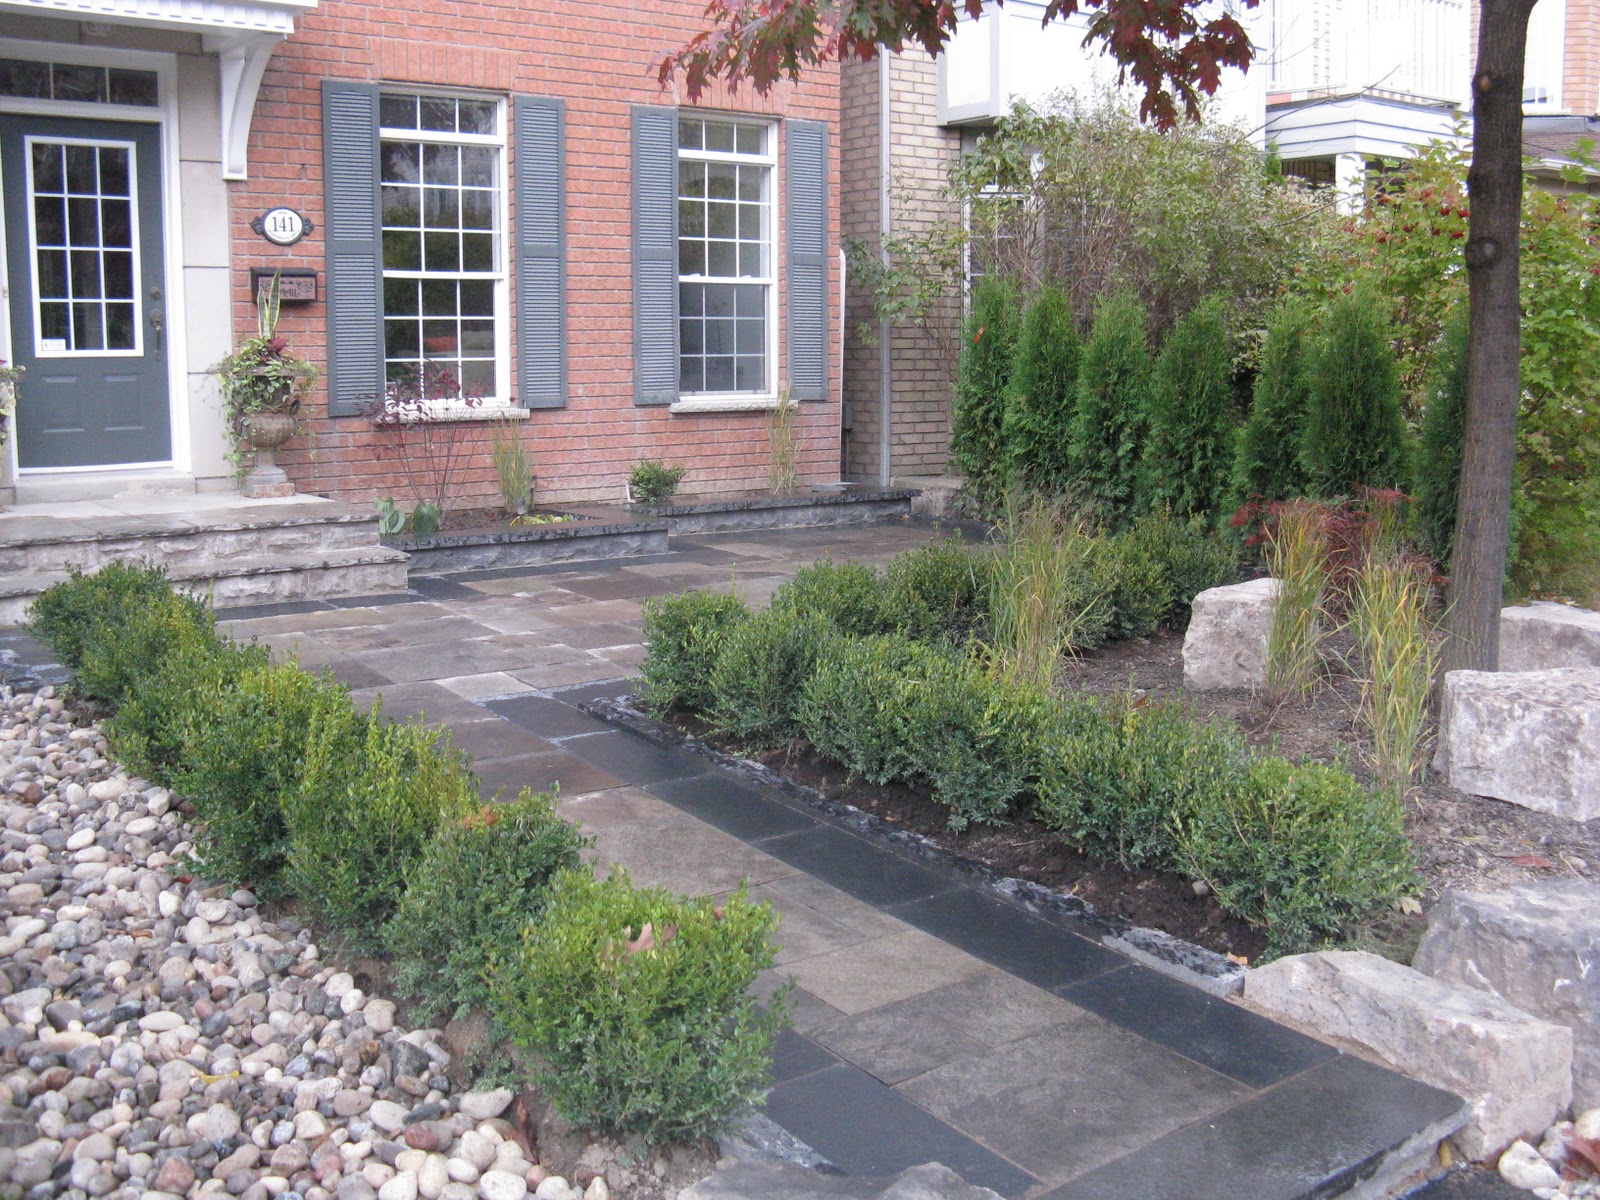 Landscaping Company Websites